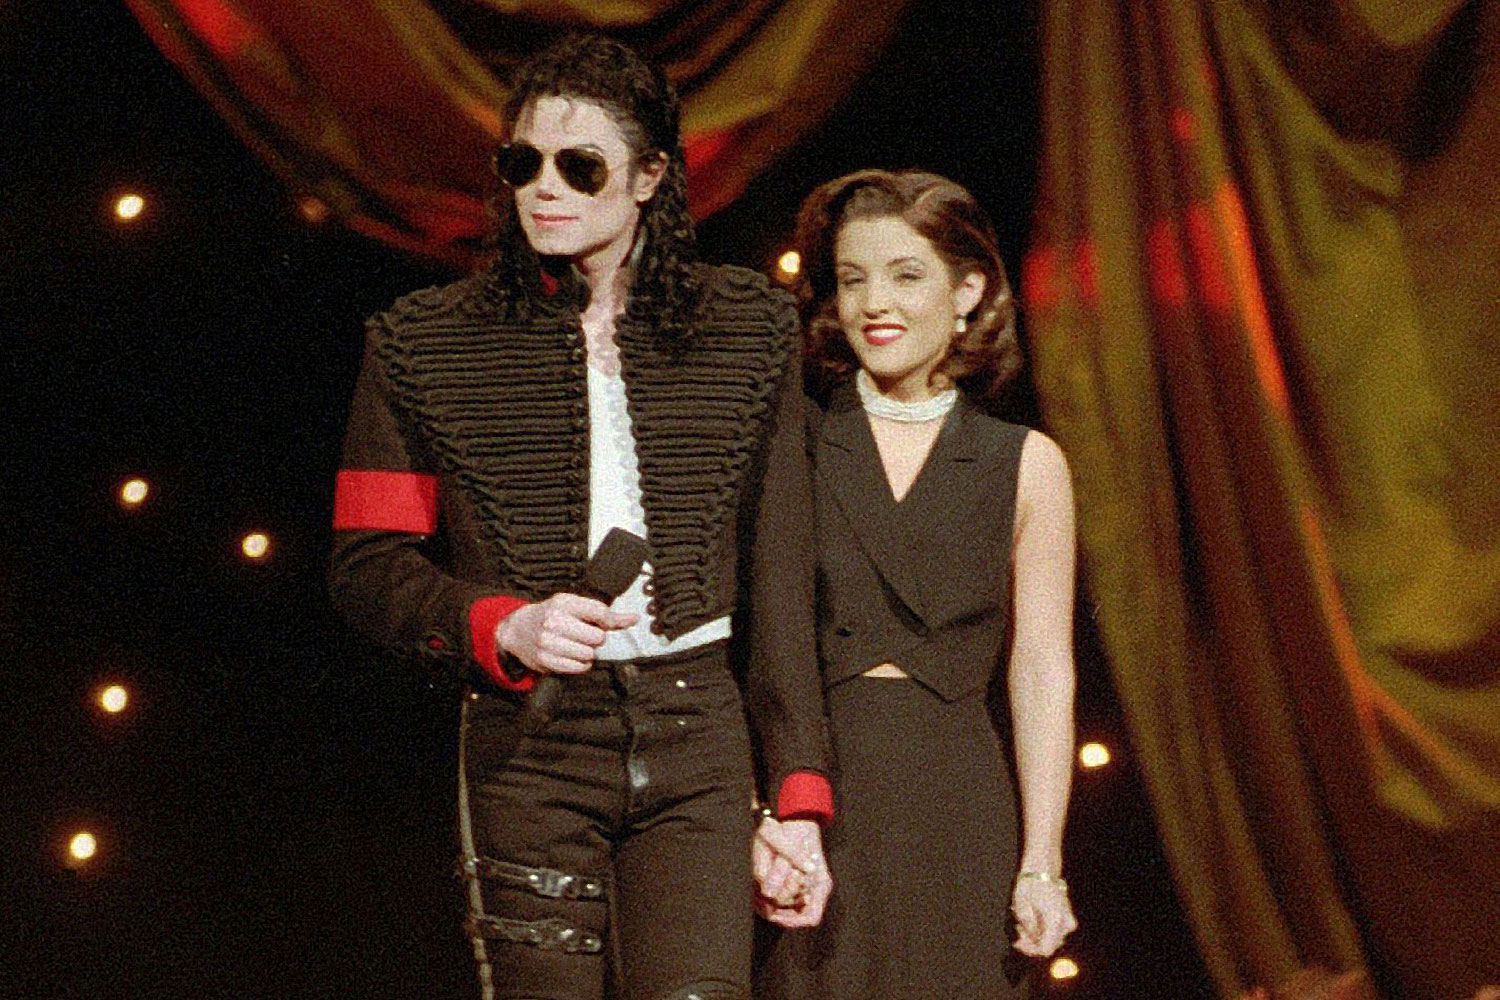 Lisa Marie Presley wanted to save Michael Jackson from his drug problem